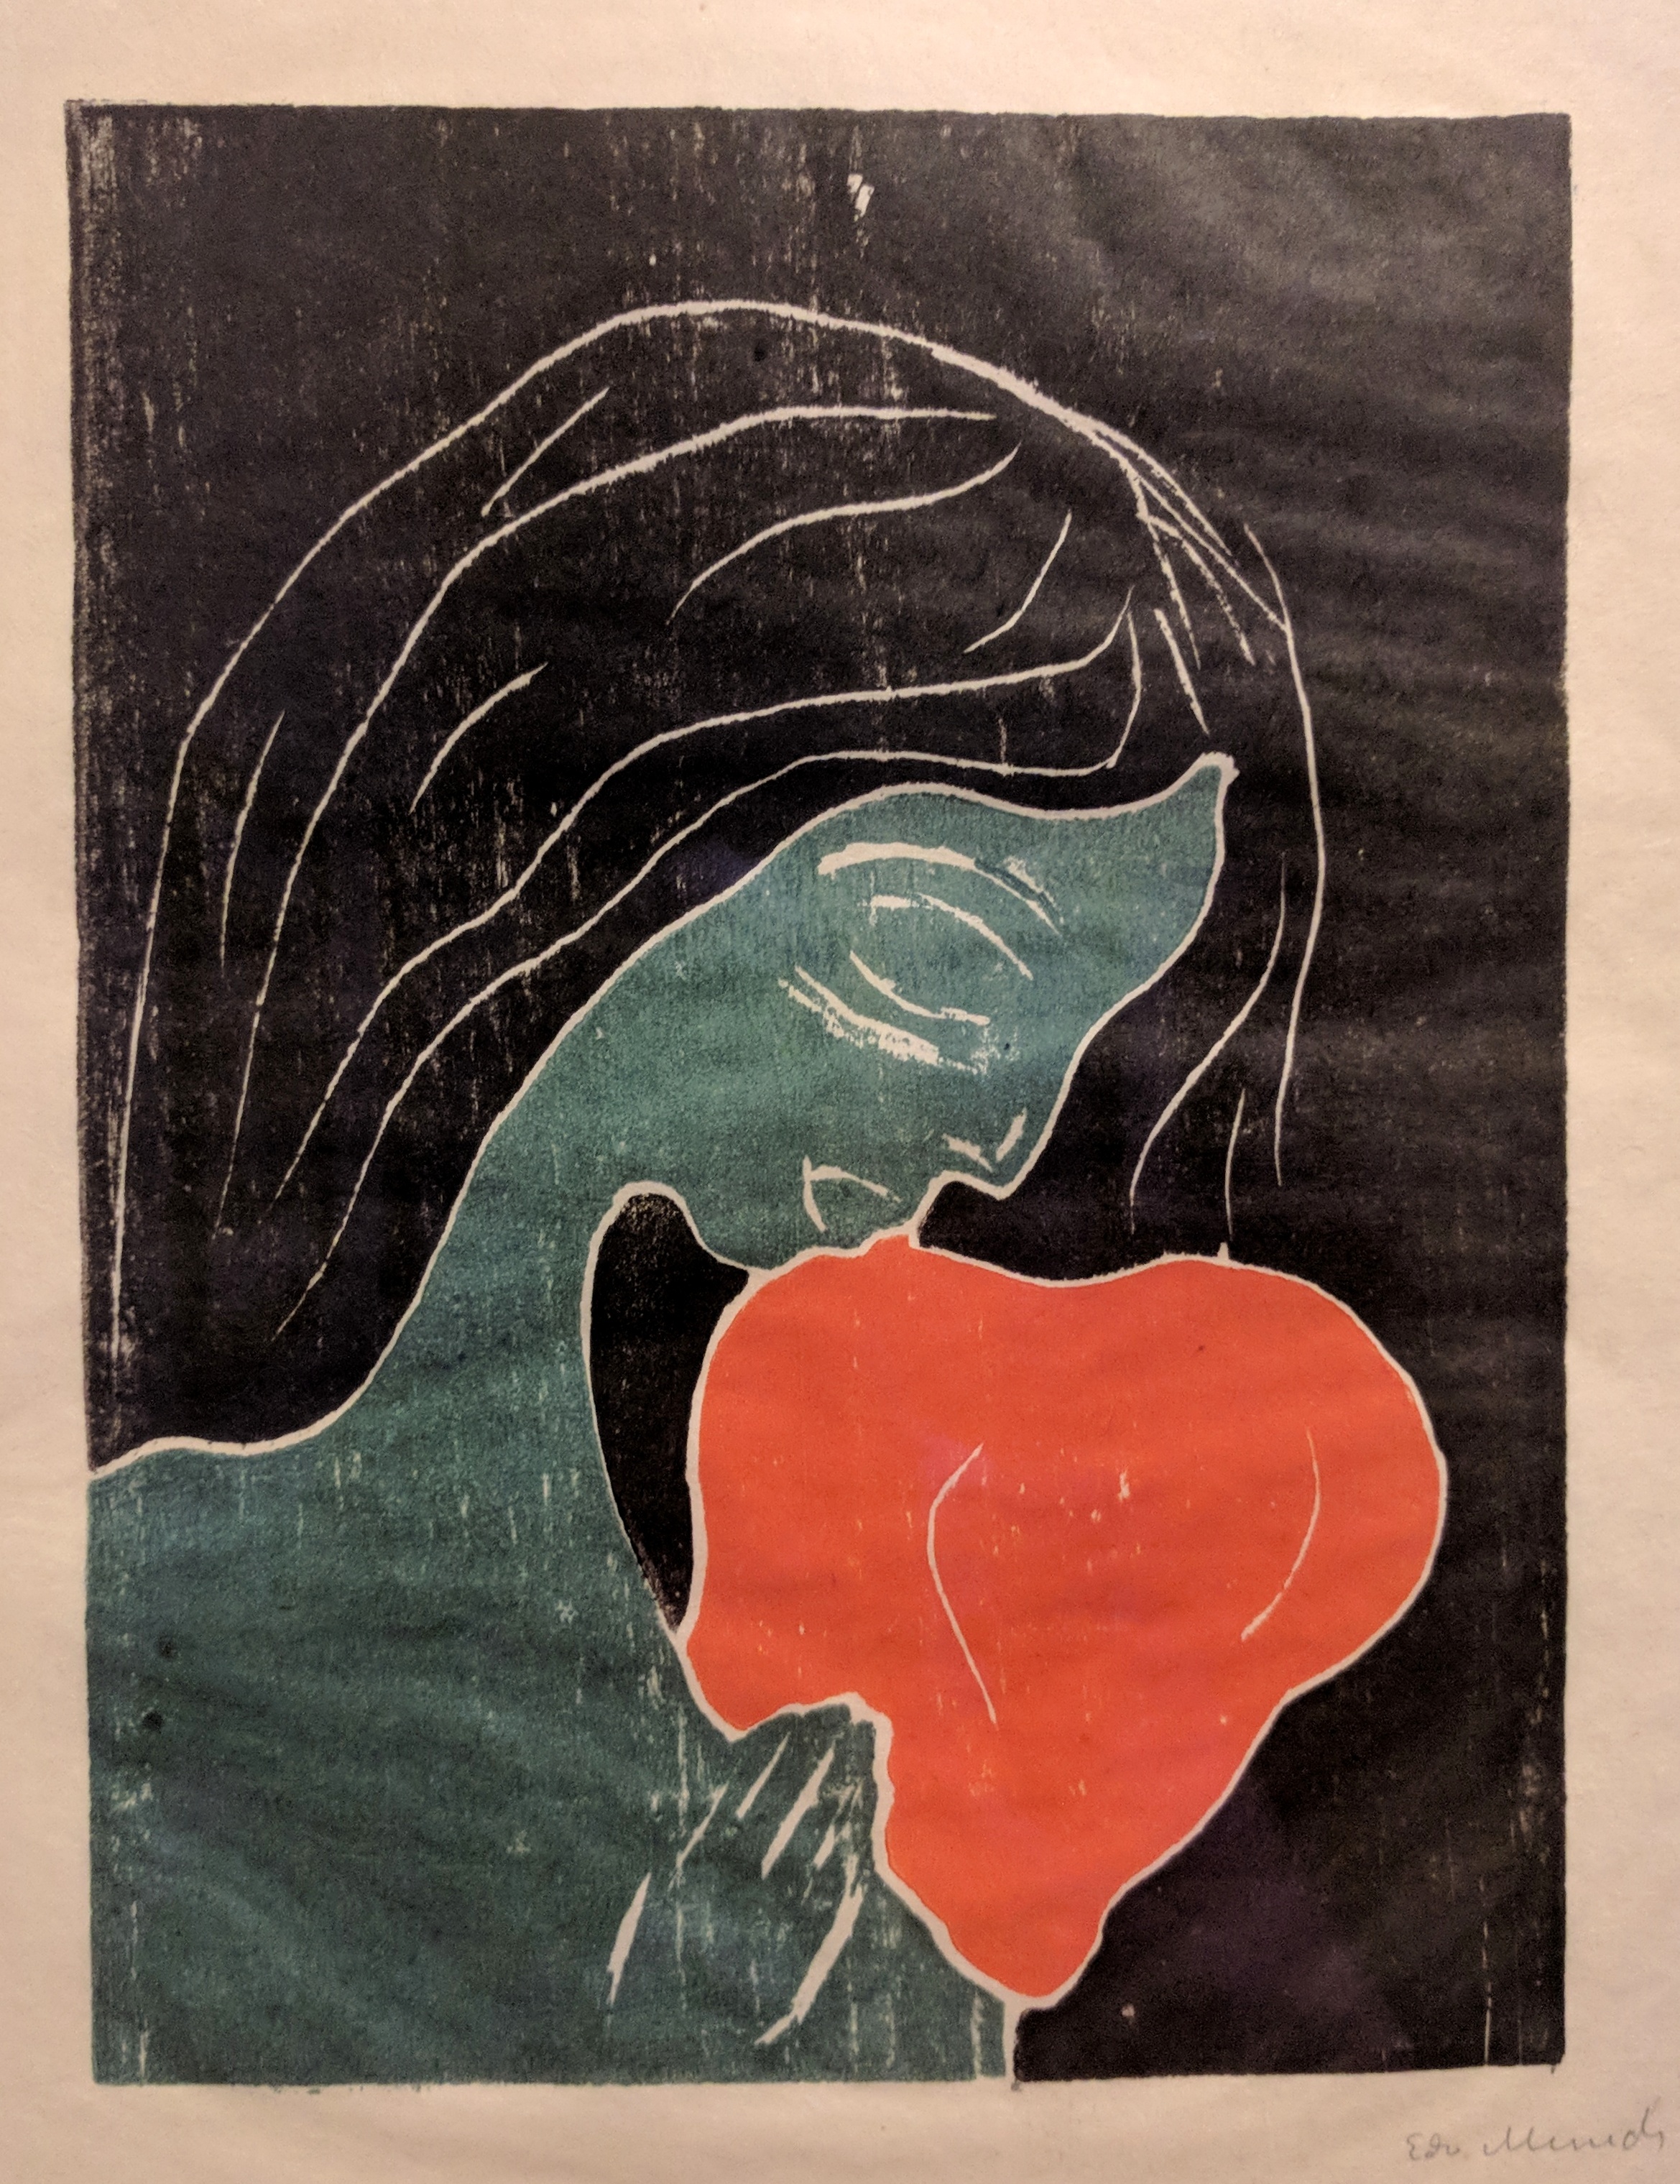 Girl with the Heart by Edvard Munch